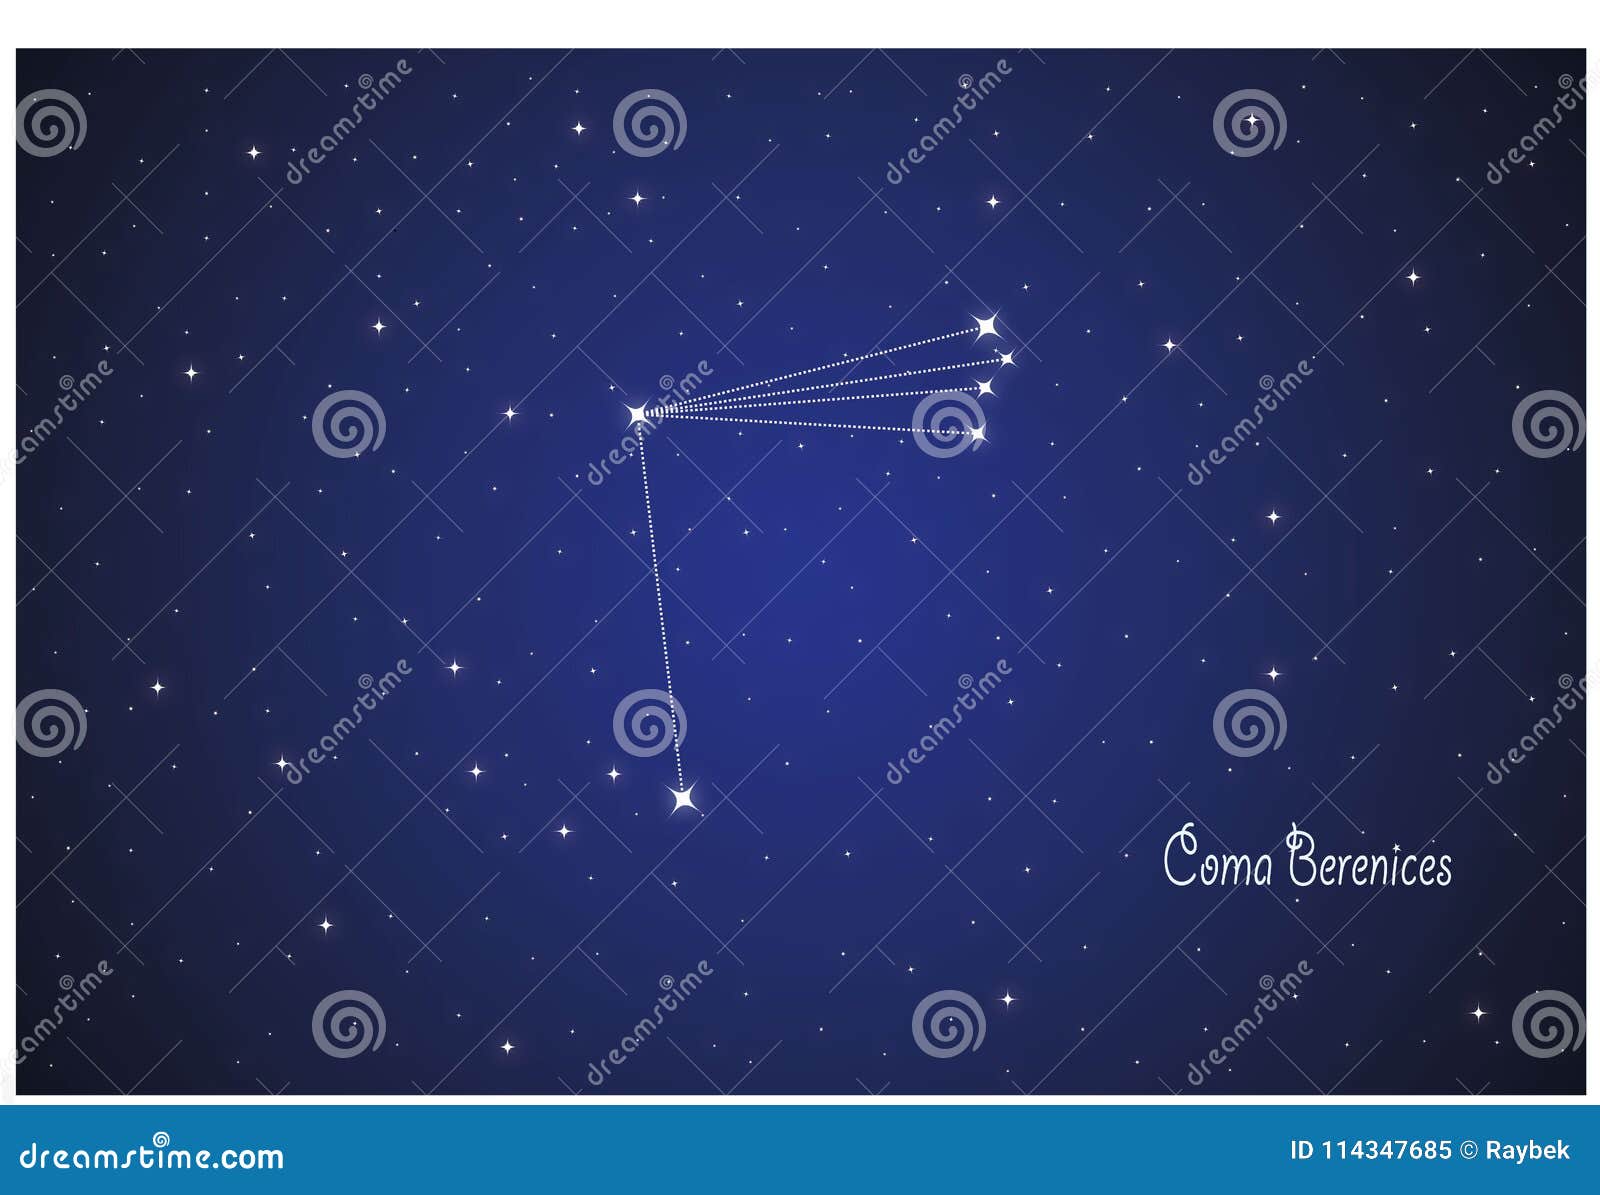 constellation of coma berenices